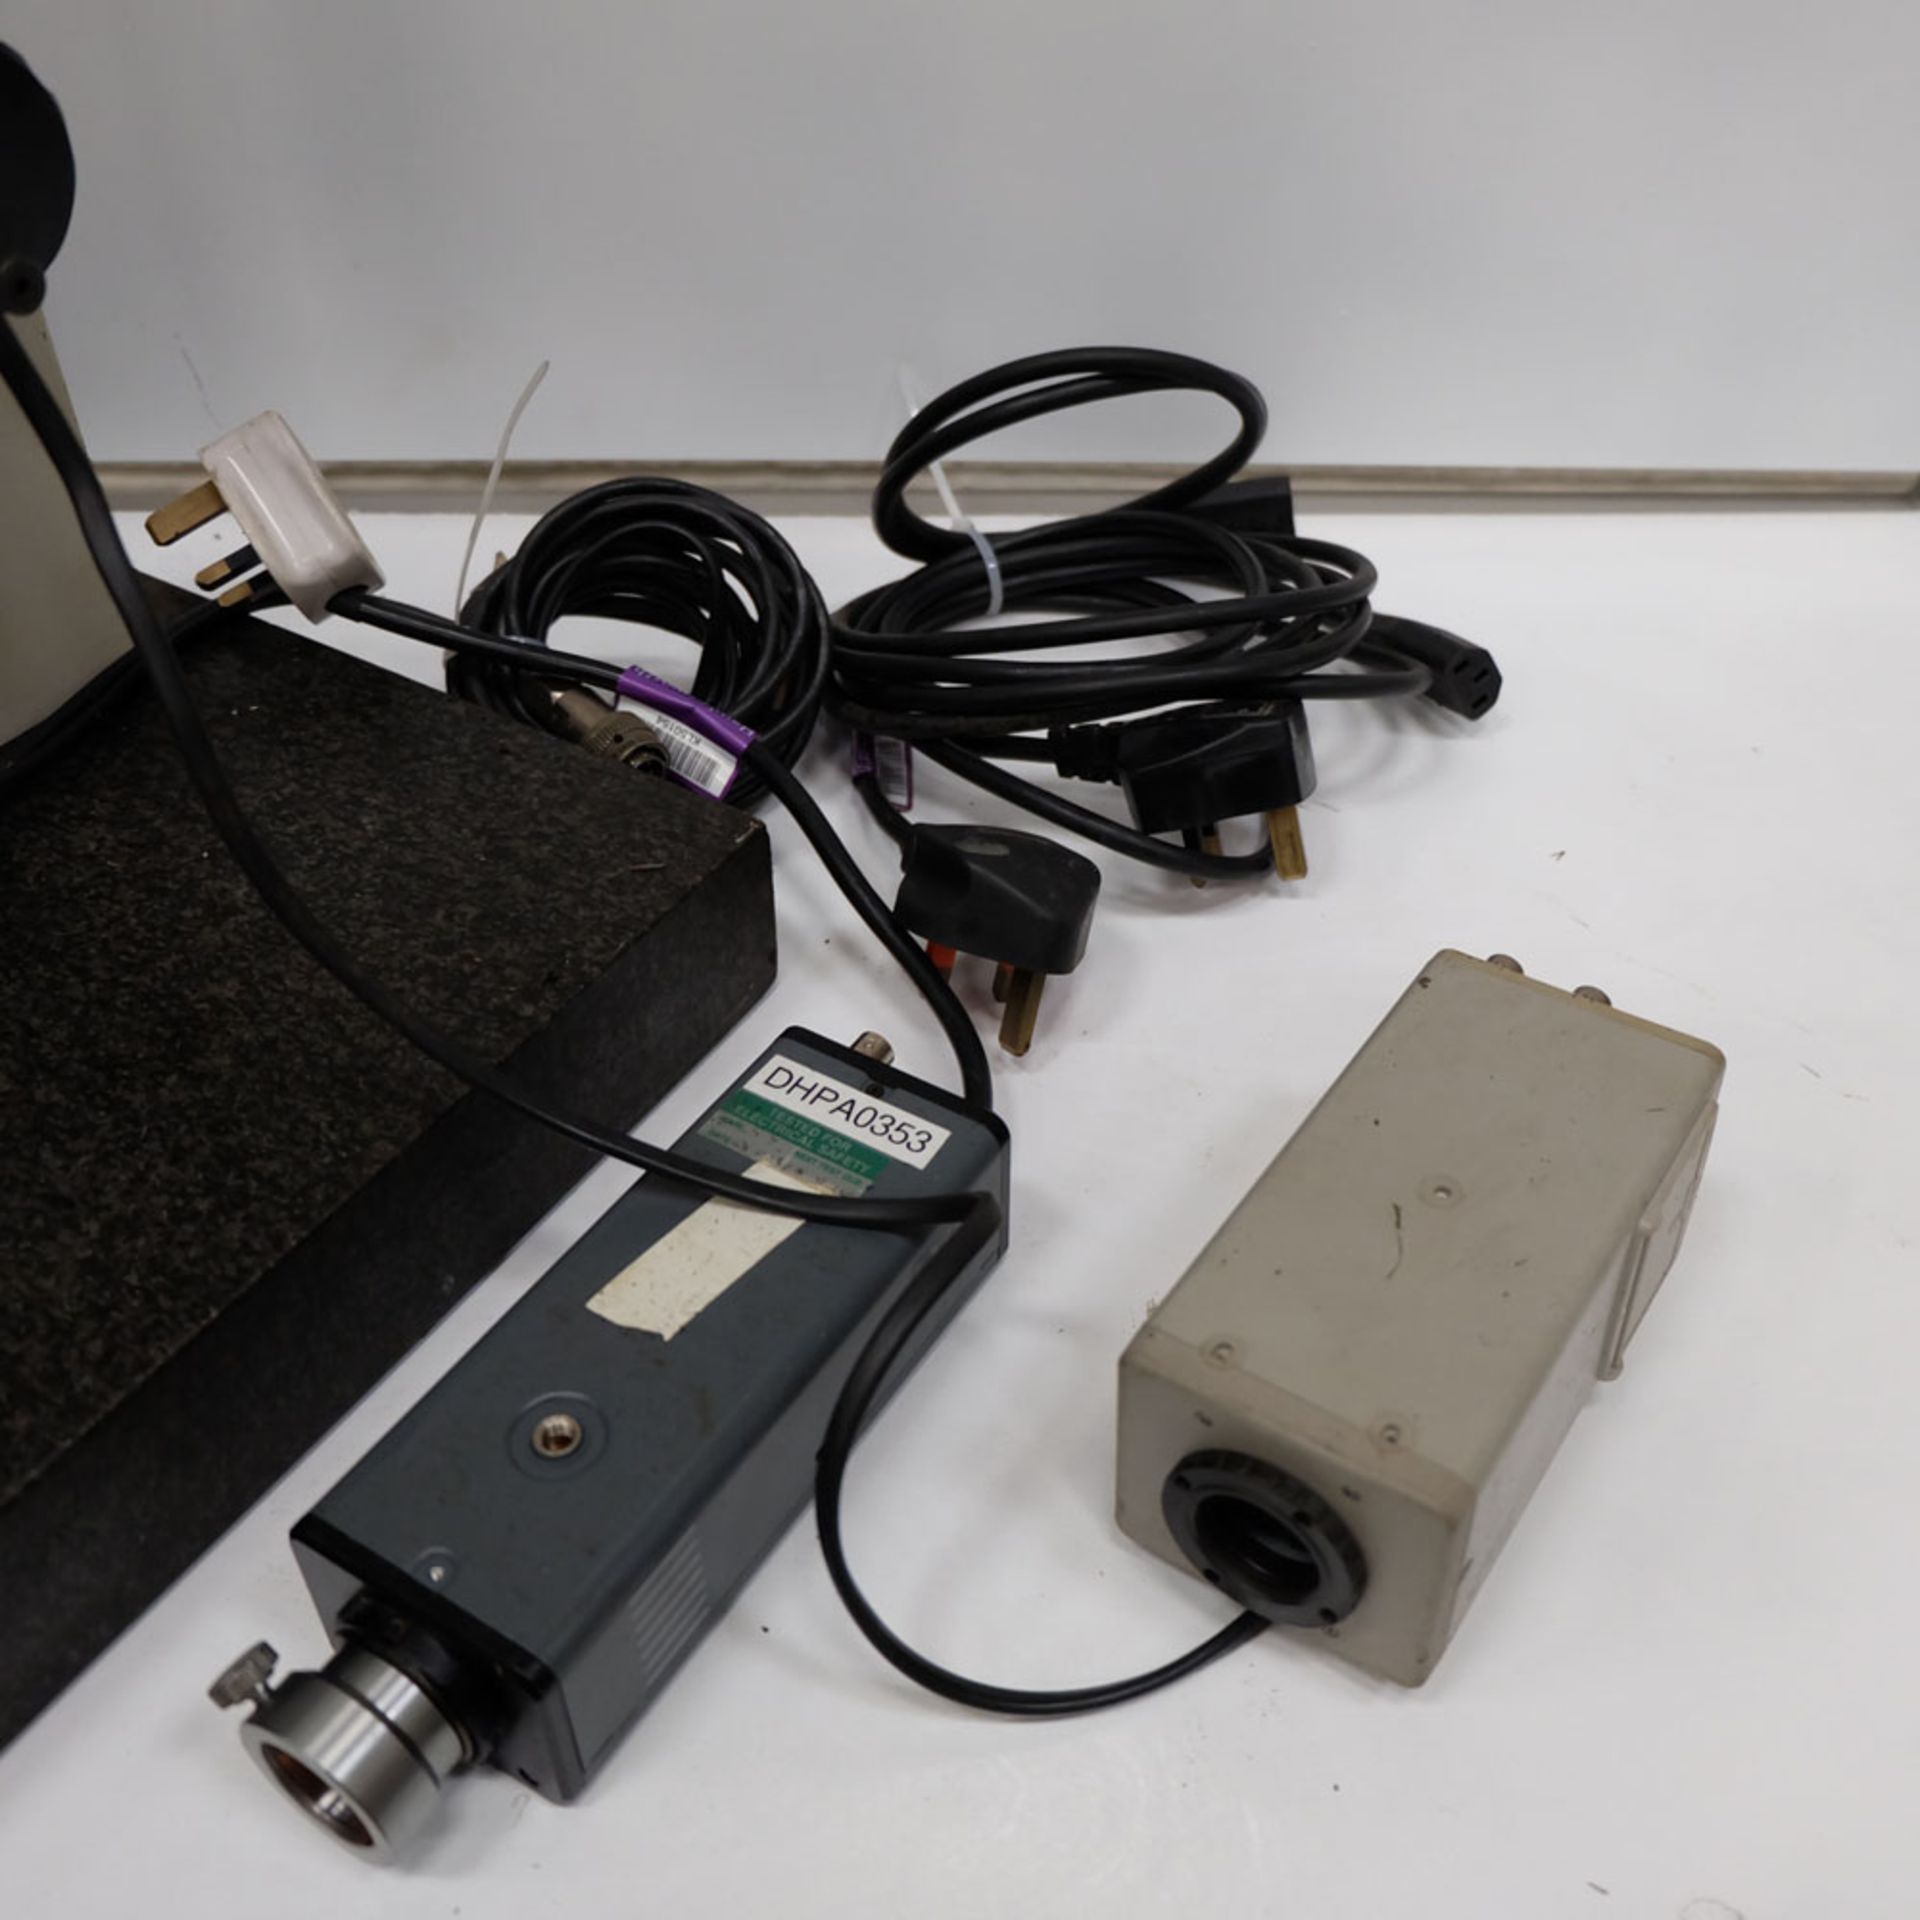 Data Recording Heads Ltd Inspection Unit Including Meiji 4 Position Microscope. - Image 9 of 9